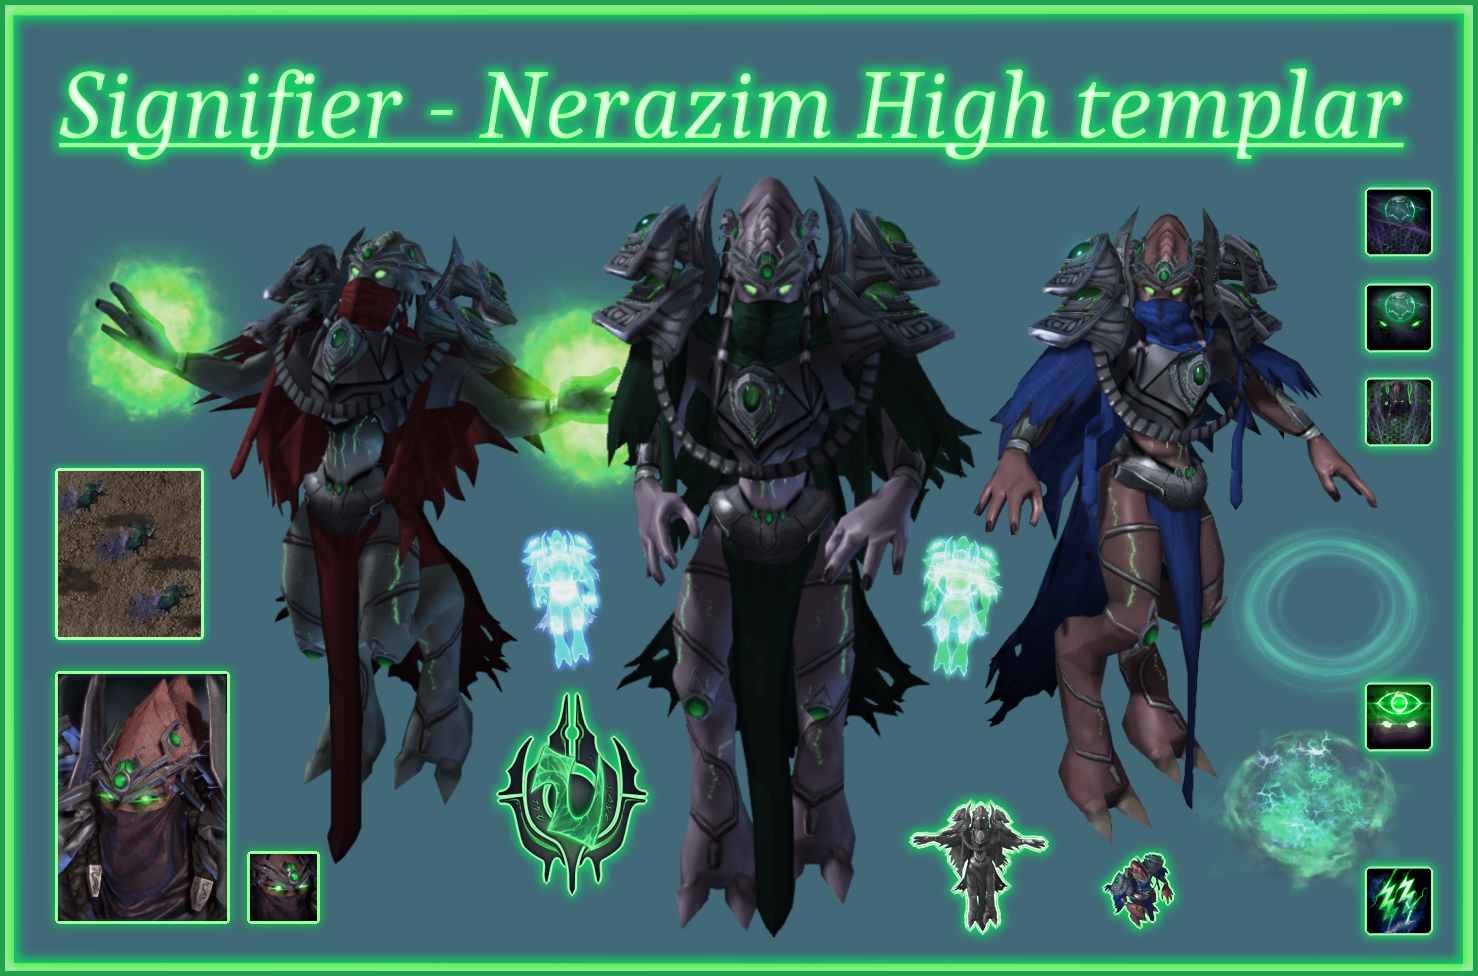 Signifier - Nerazim High Templar (Based on concept by Phill-Art)